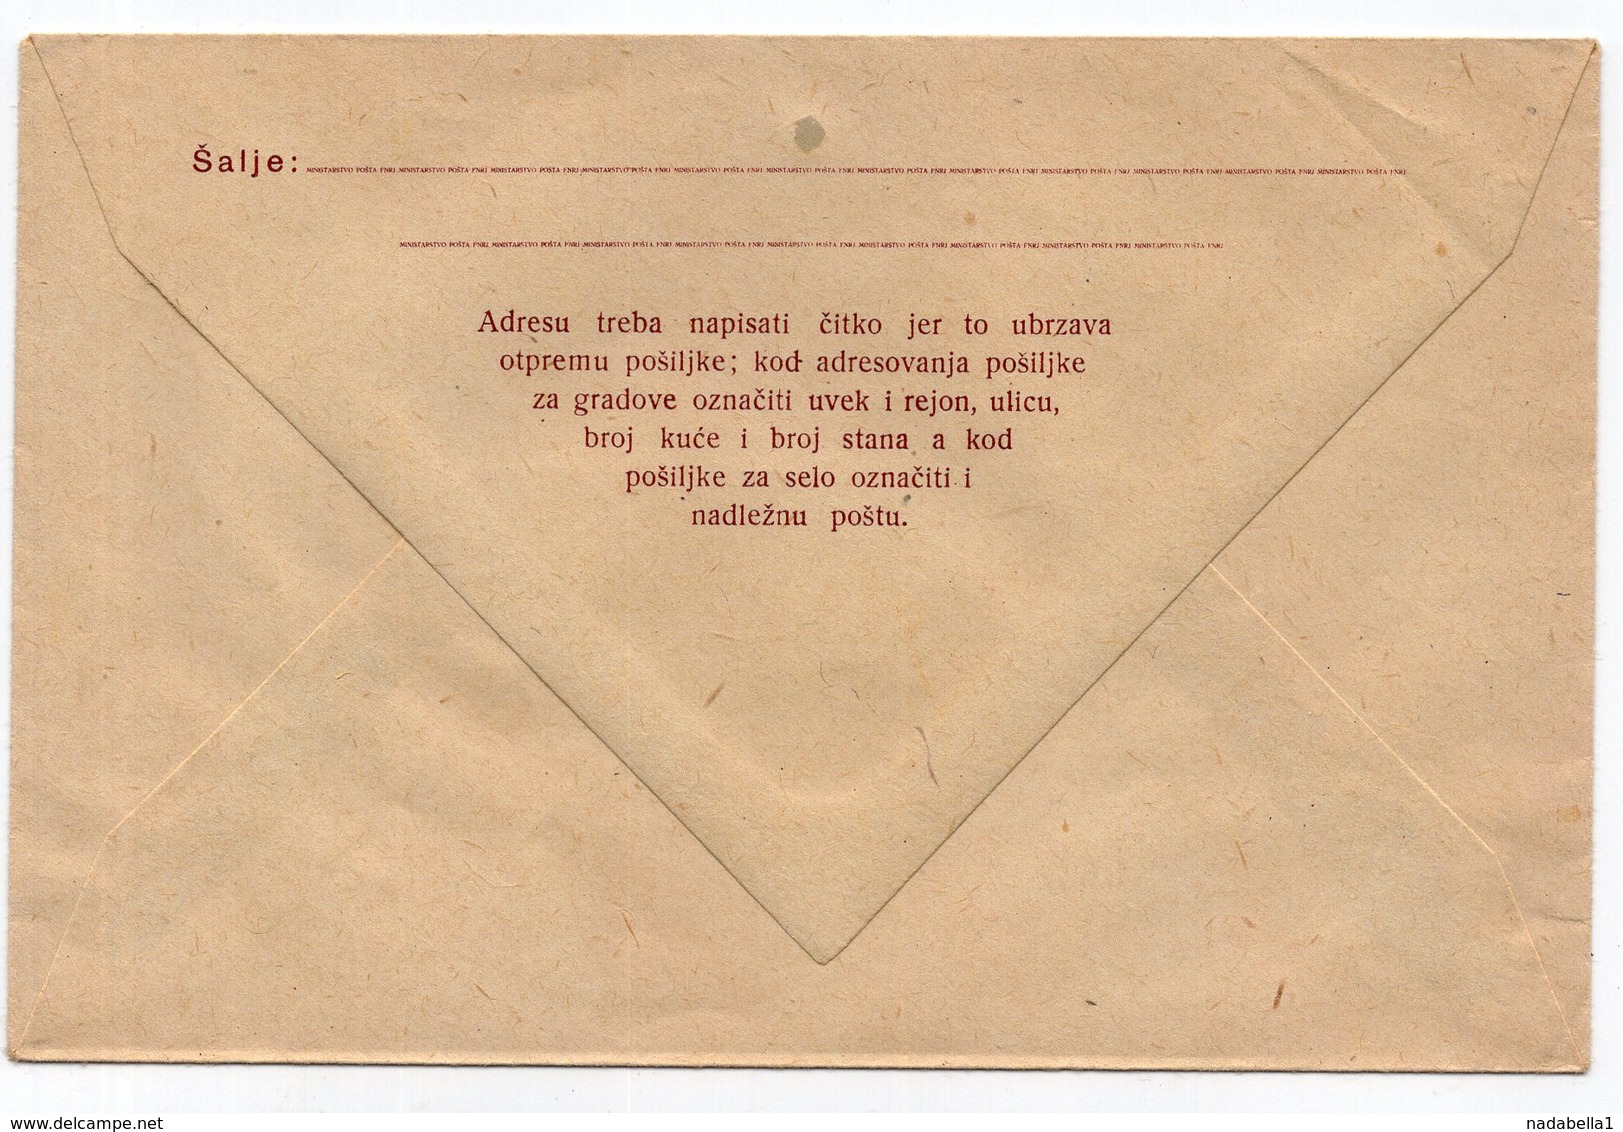 1949 YUGOSLAVIA, STATIONERY COVER WITH ERROR, COMMA MISSING - Postal Stationery